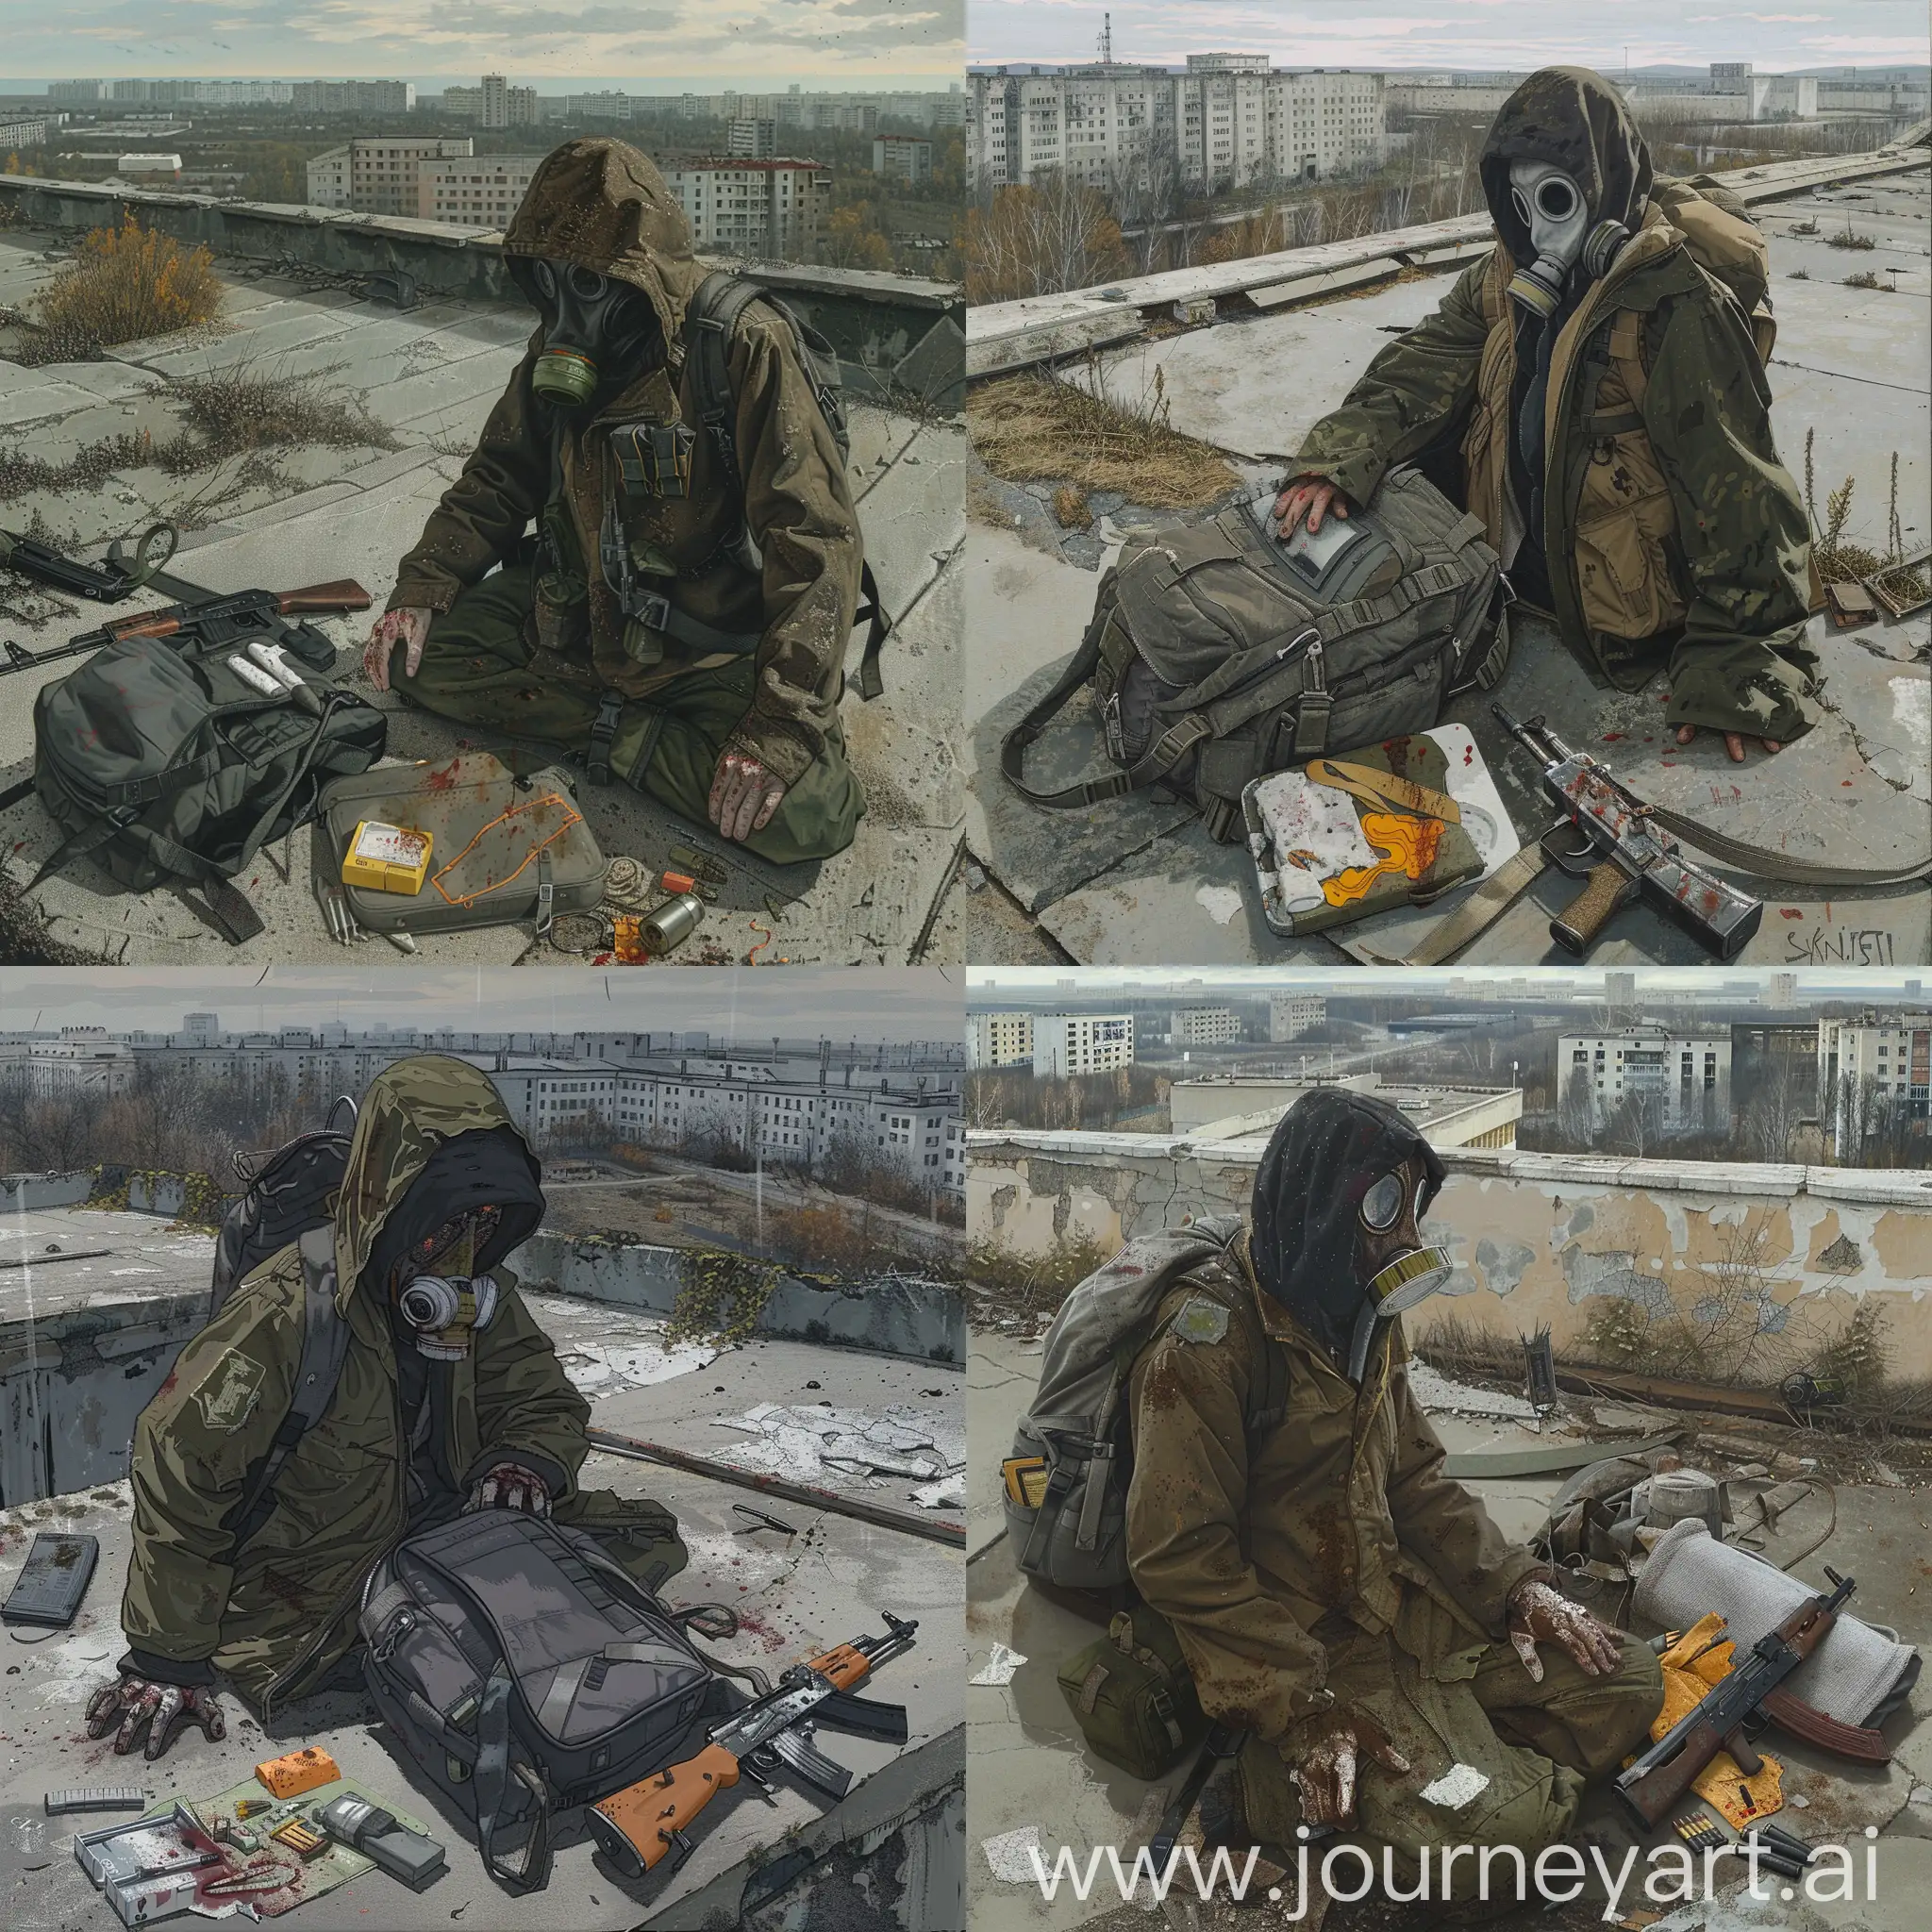 Stalker art, mystical art, the roof of an abandoned building in the abandoned city of Pripyat, a stalker in a gas mask, in a brown jacket, military unloading on top of the jacket, next to the stalker lies a gray backpack, an open and already used first aid kit, bandages, the stalker is almost covered in dirt, his hands are covered in blood and 2 fingers are missing on one hand, there is also an AK-47 lying nearby, the abandoned Soviet city of Pripyat is visible from the roof, mystical art.